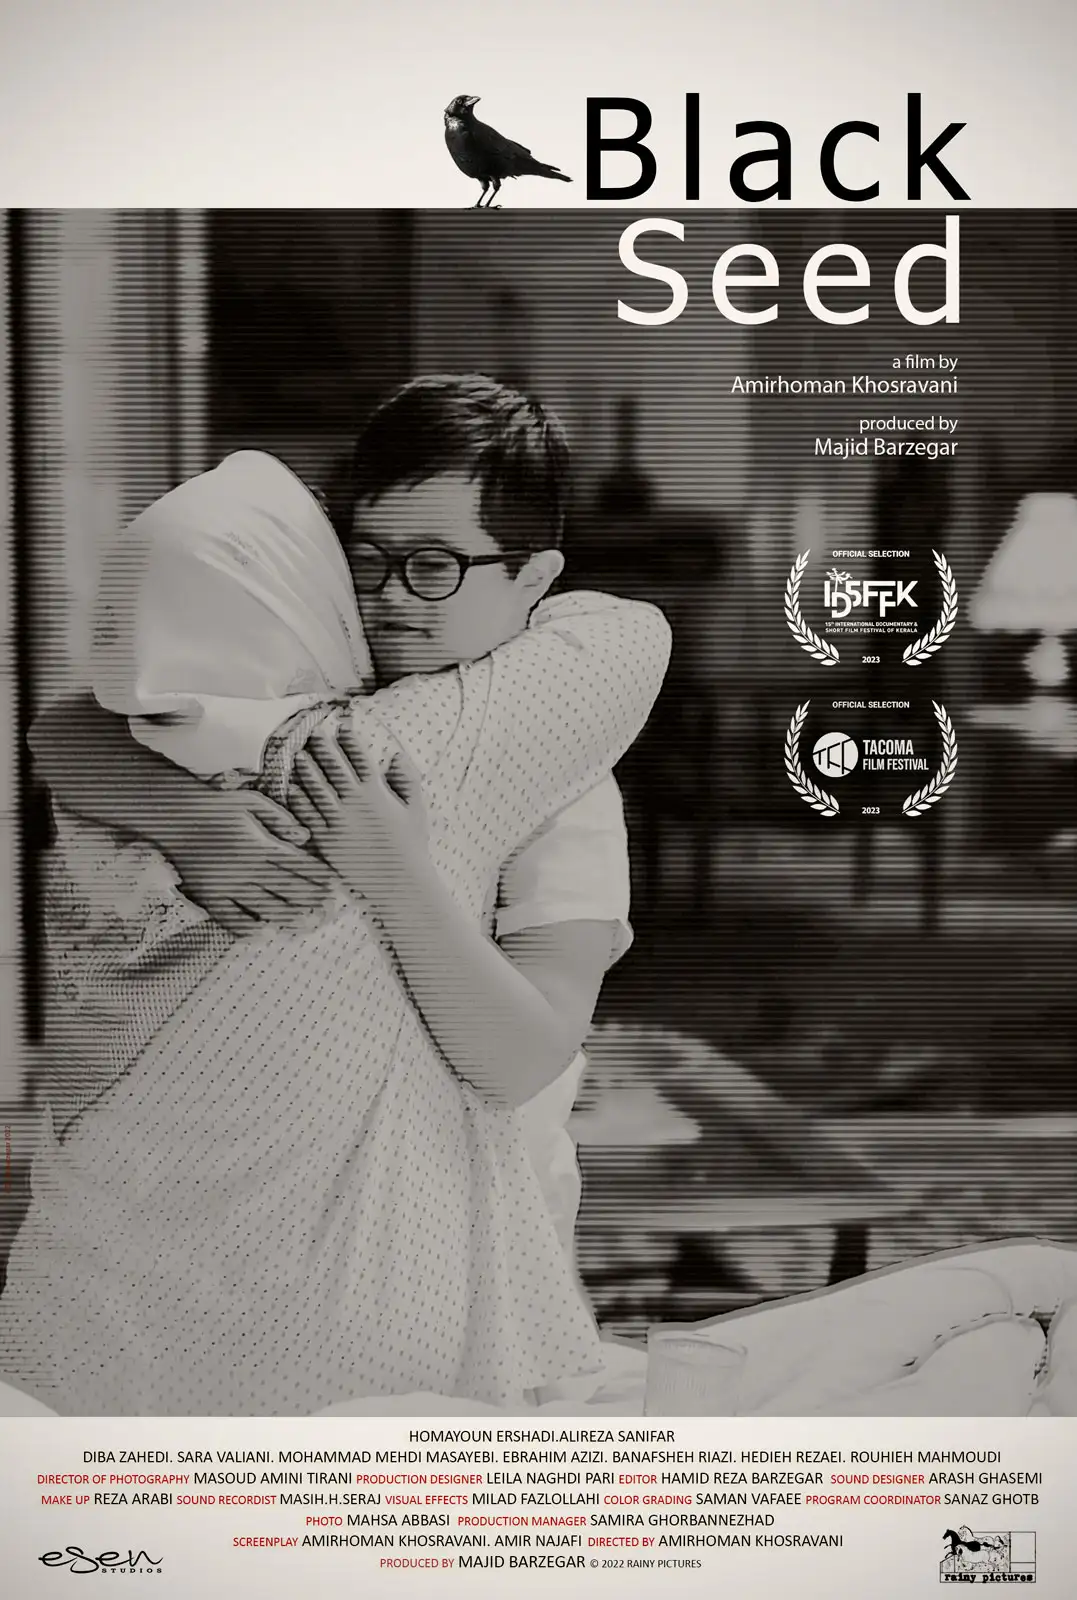 Poster of the short film "Black Seed"